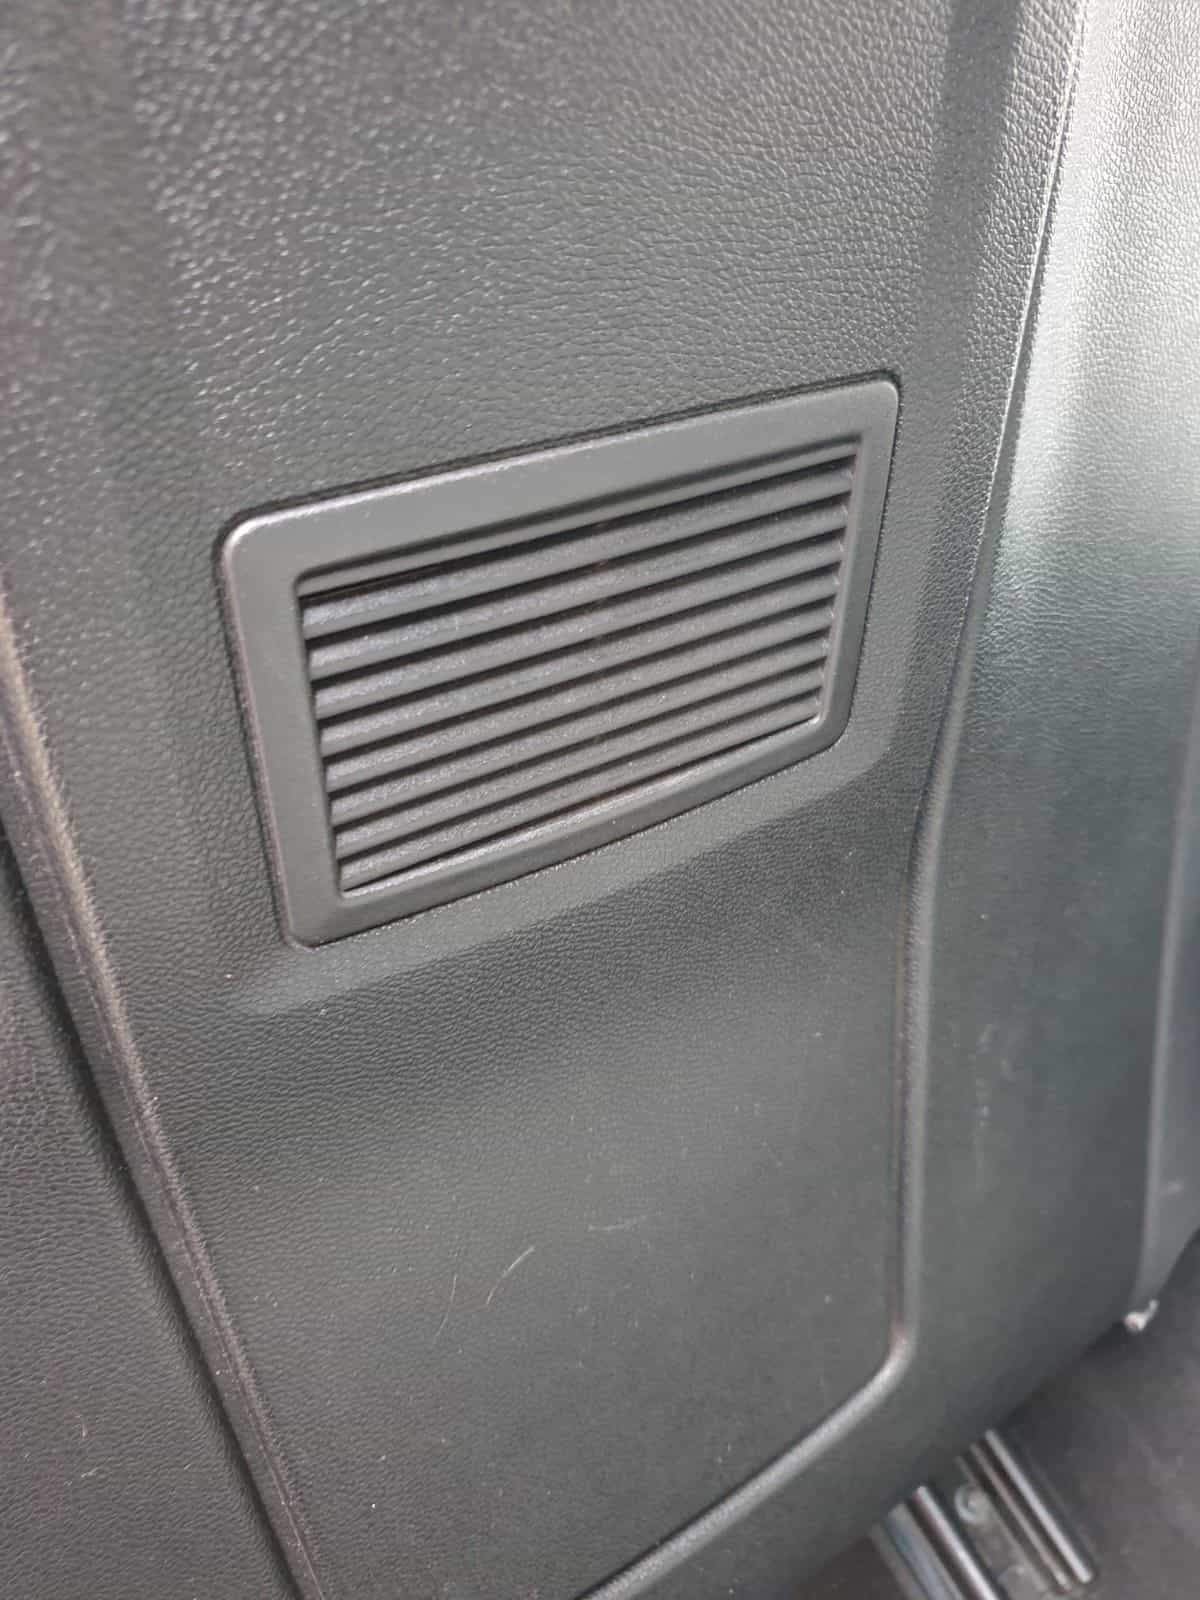 Interior/Upholstery - WANTED - E350 - A207 Drivers Seat Rear Airvent - New or Used - 2011 Mercedes-Benz E350 - Northwich CW9, United Kingdom